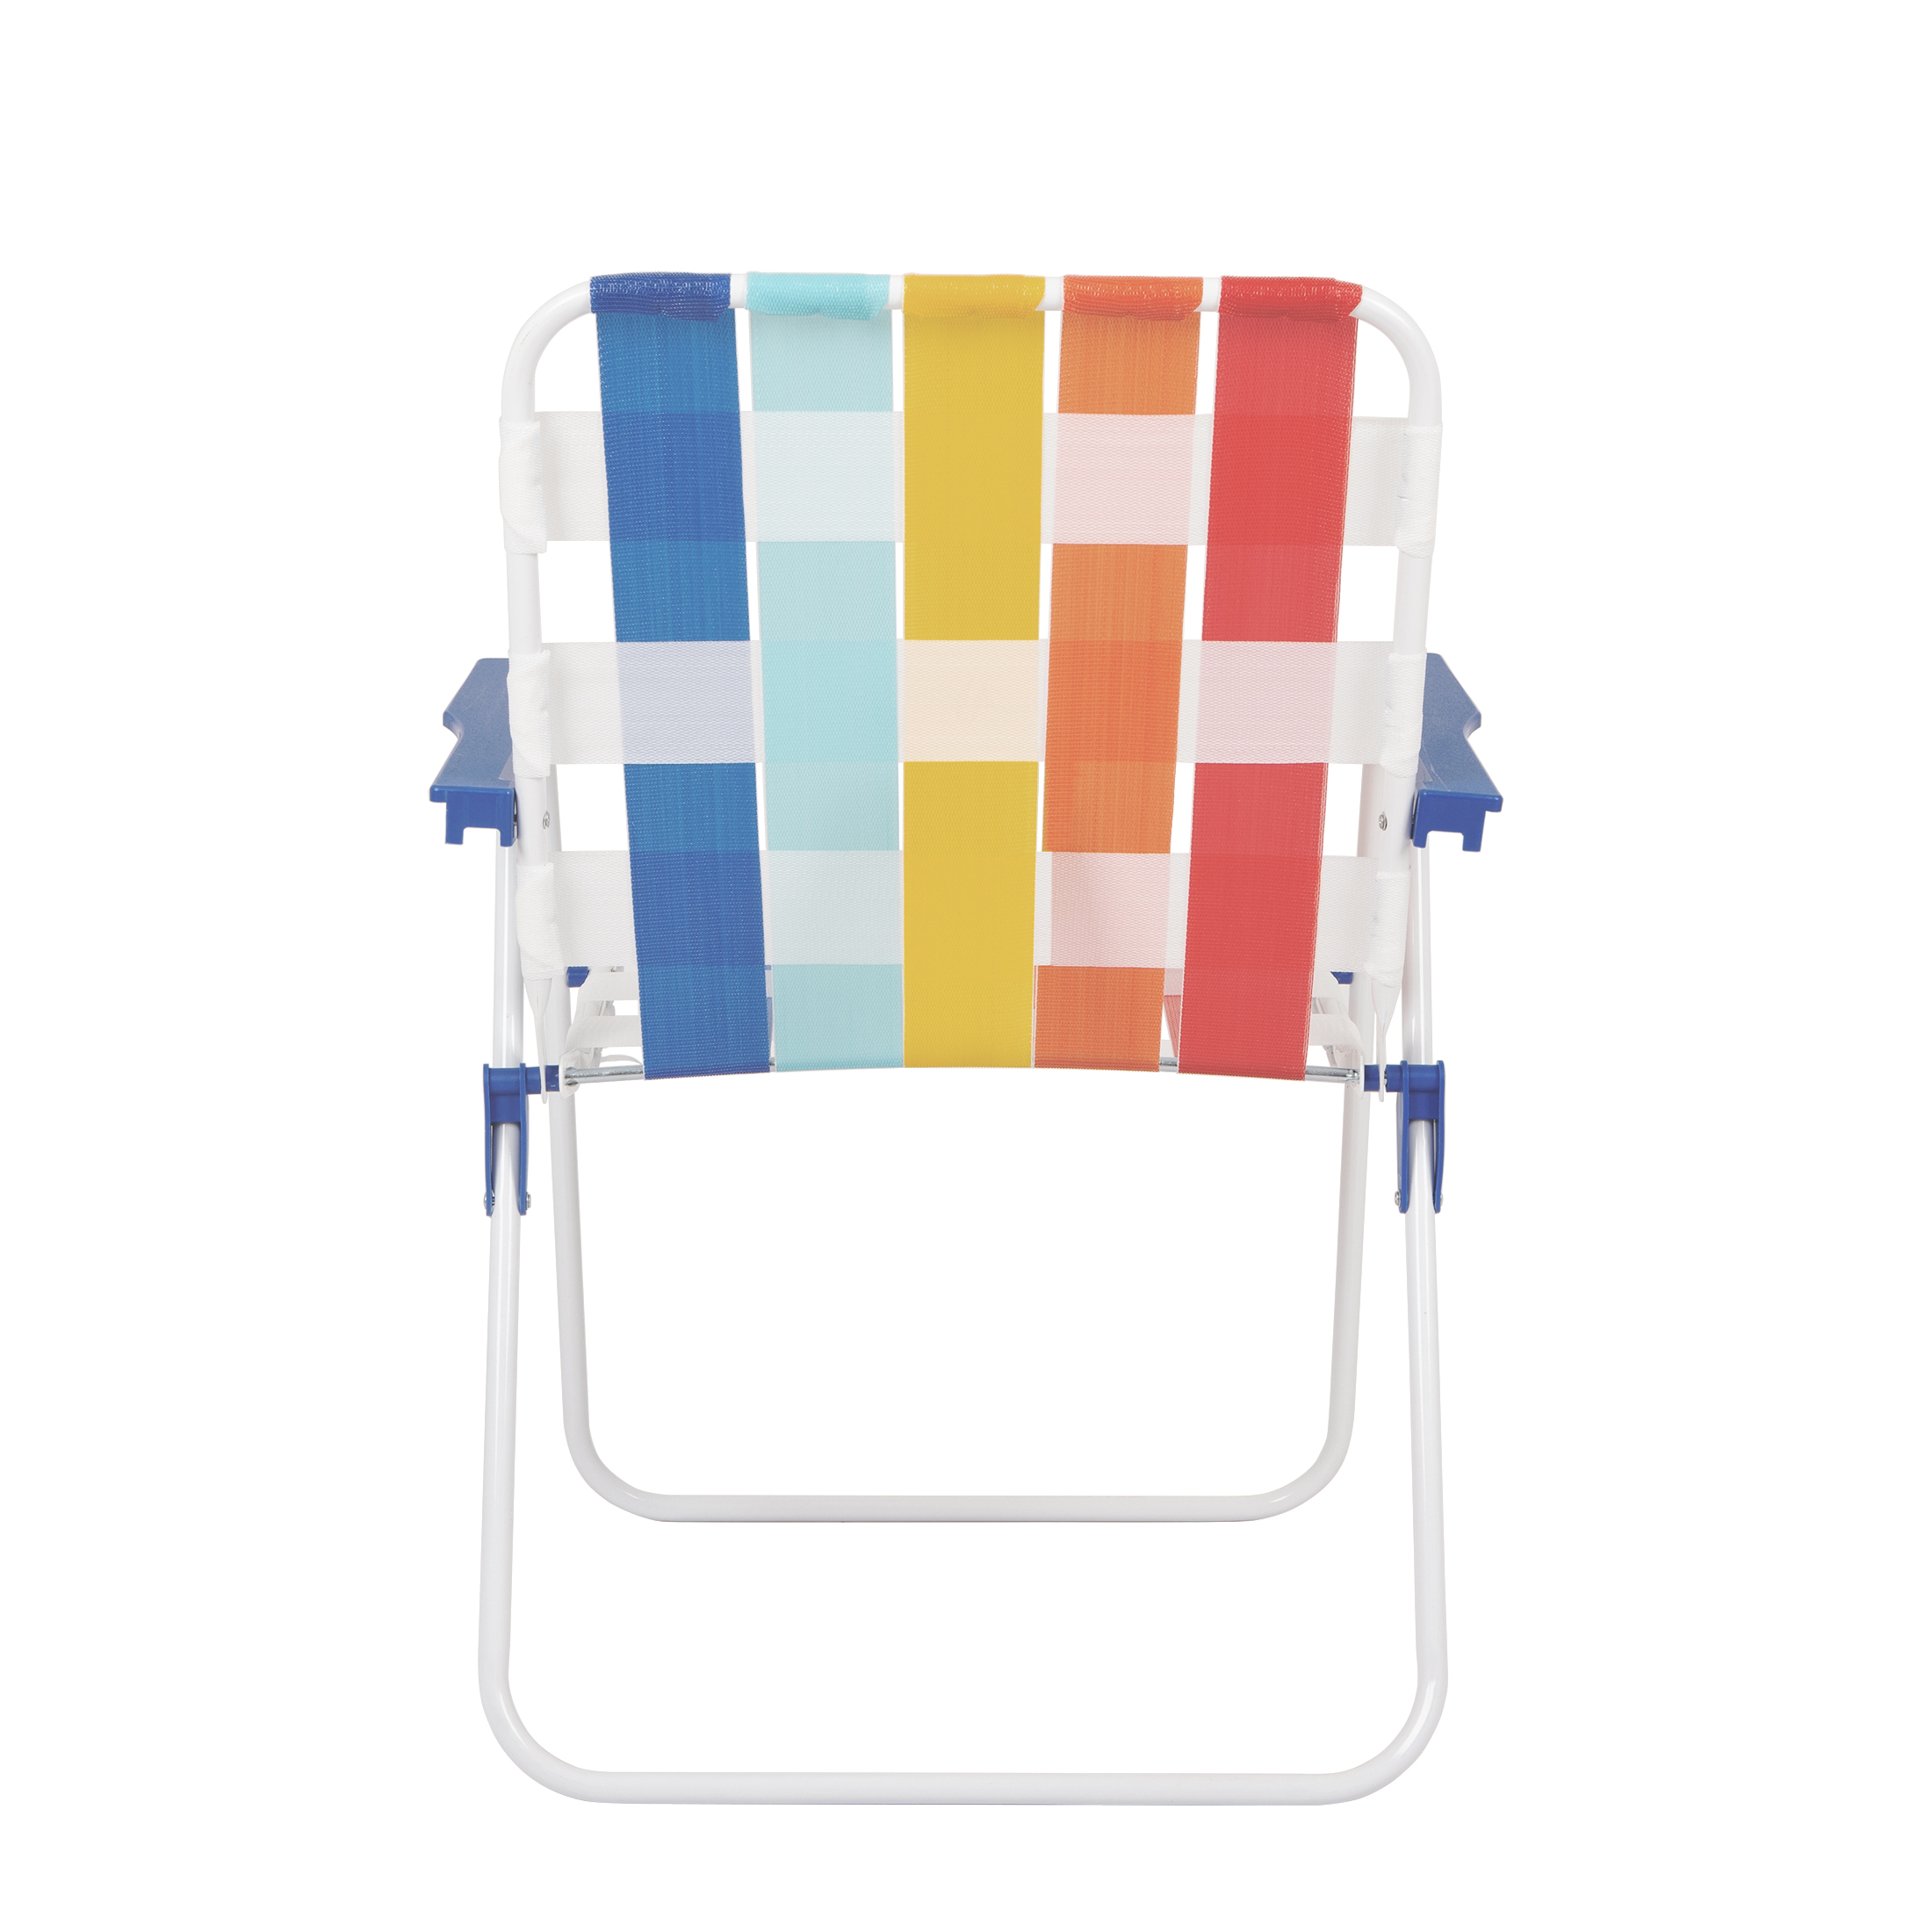 Mainstays Folding Beach Web Chair, Multicolor - image 4 of 9